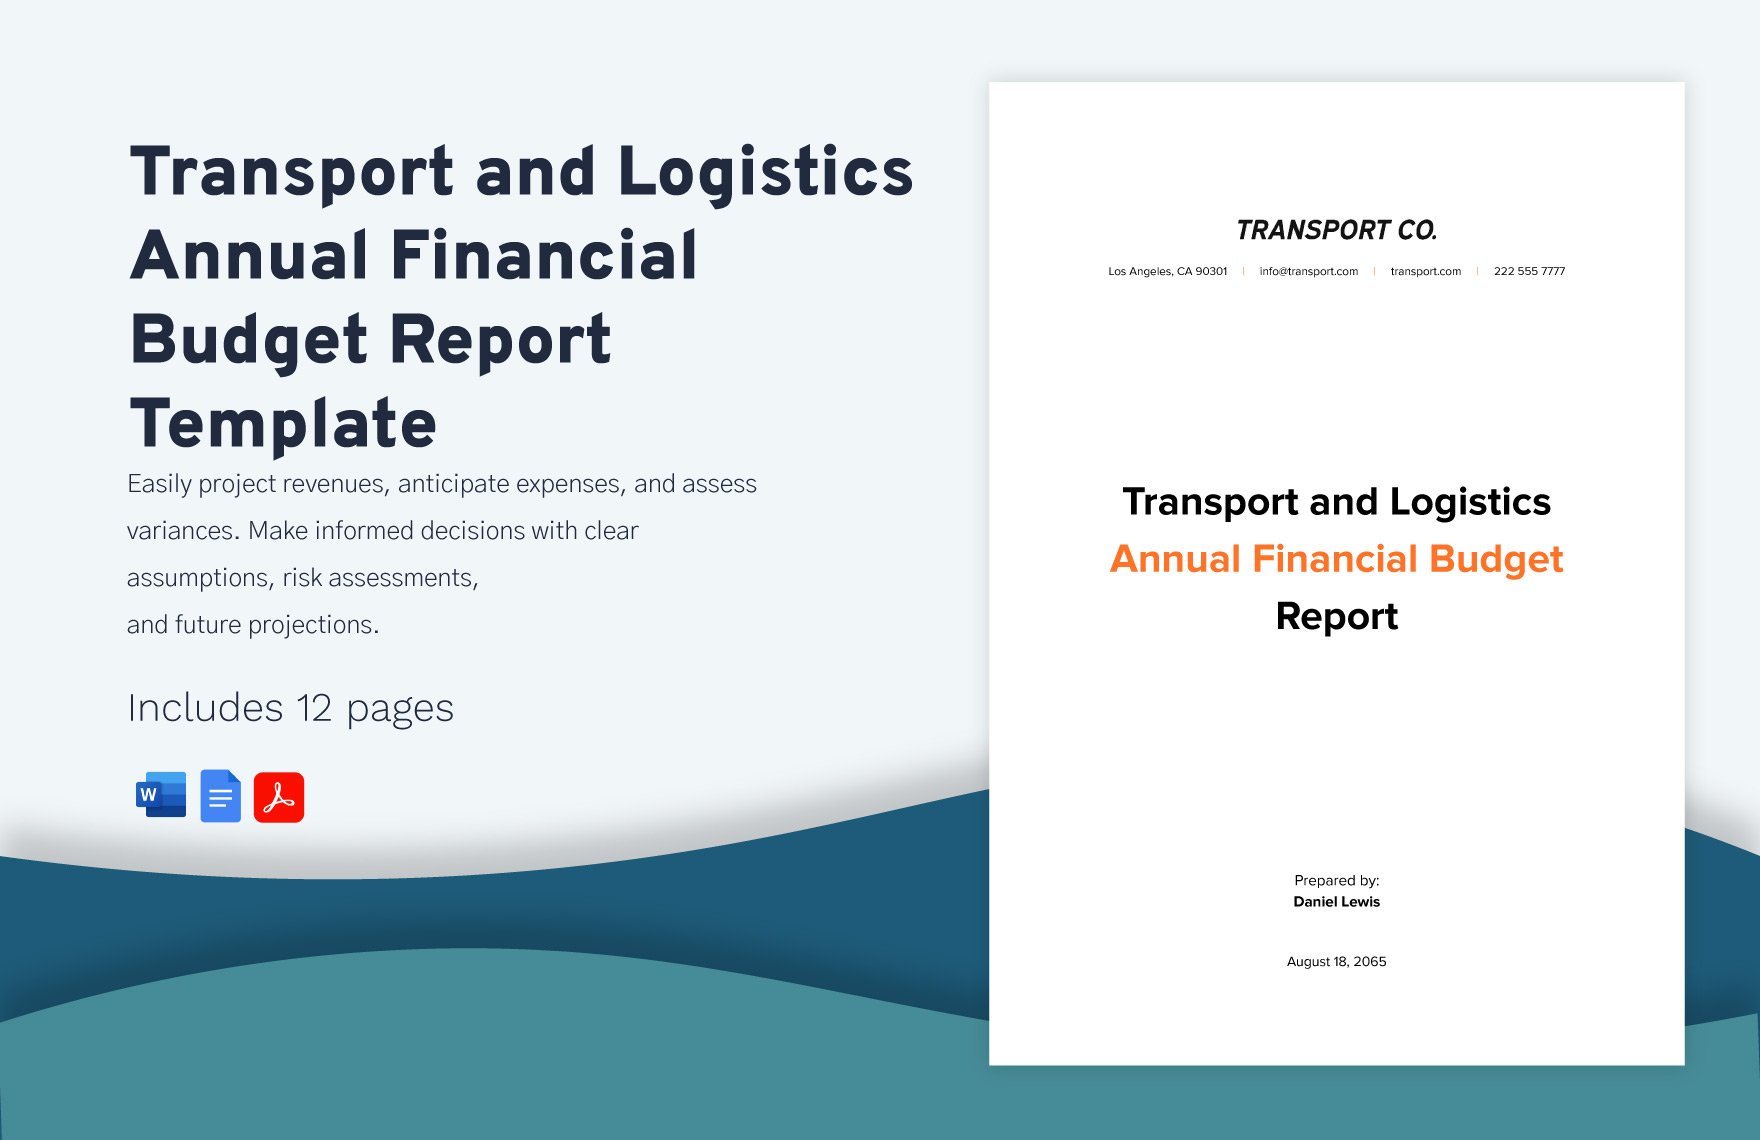 Transport and Logistics Annual Financial Budget Report Template